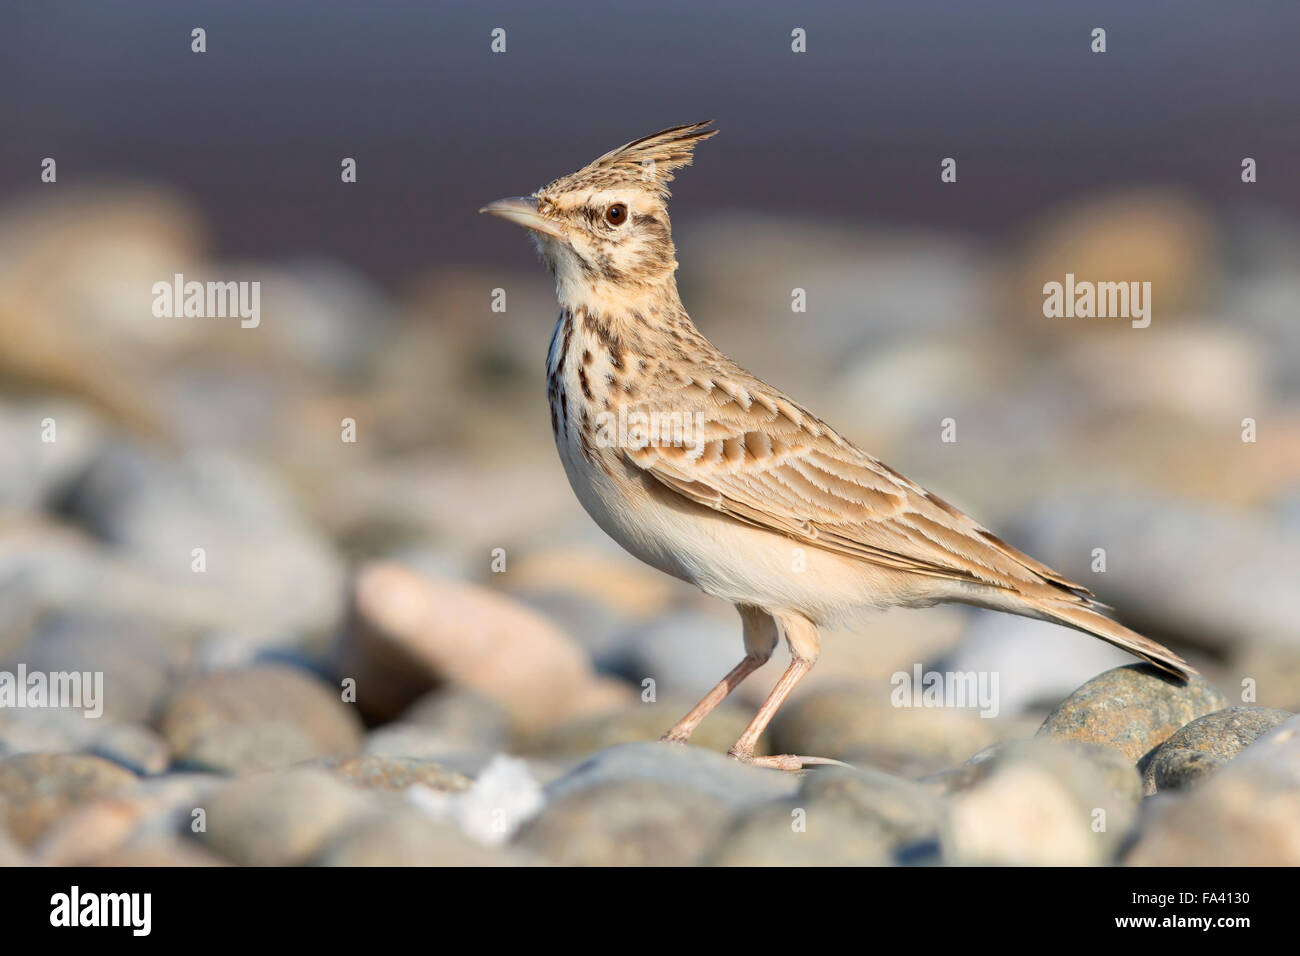 Crested Lark, Adult standing on pebbles, Qurayyat, Muscat Governorate, Oman Stock Photo